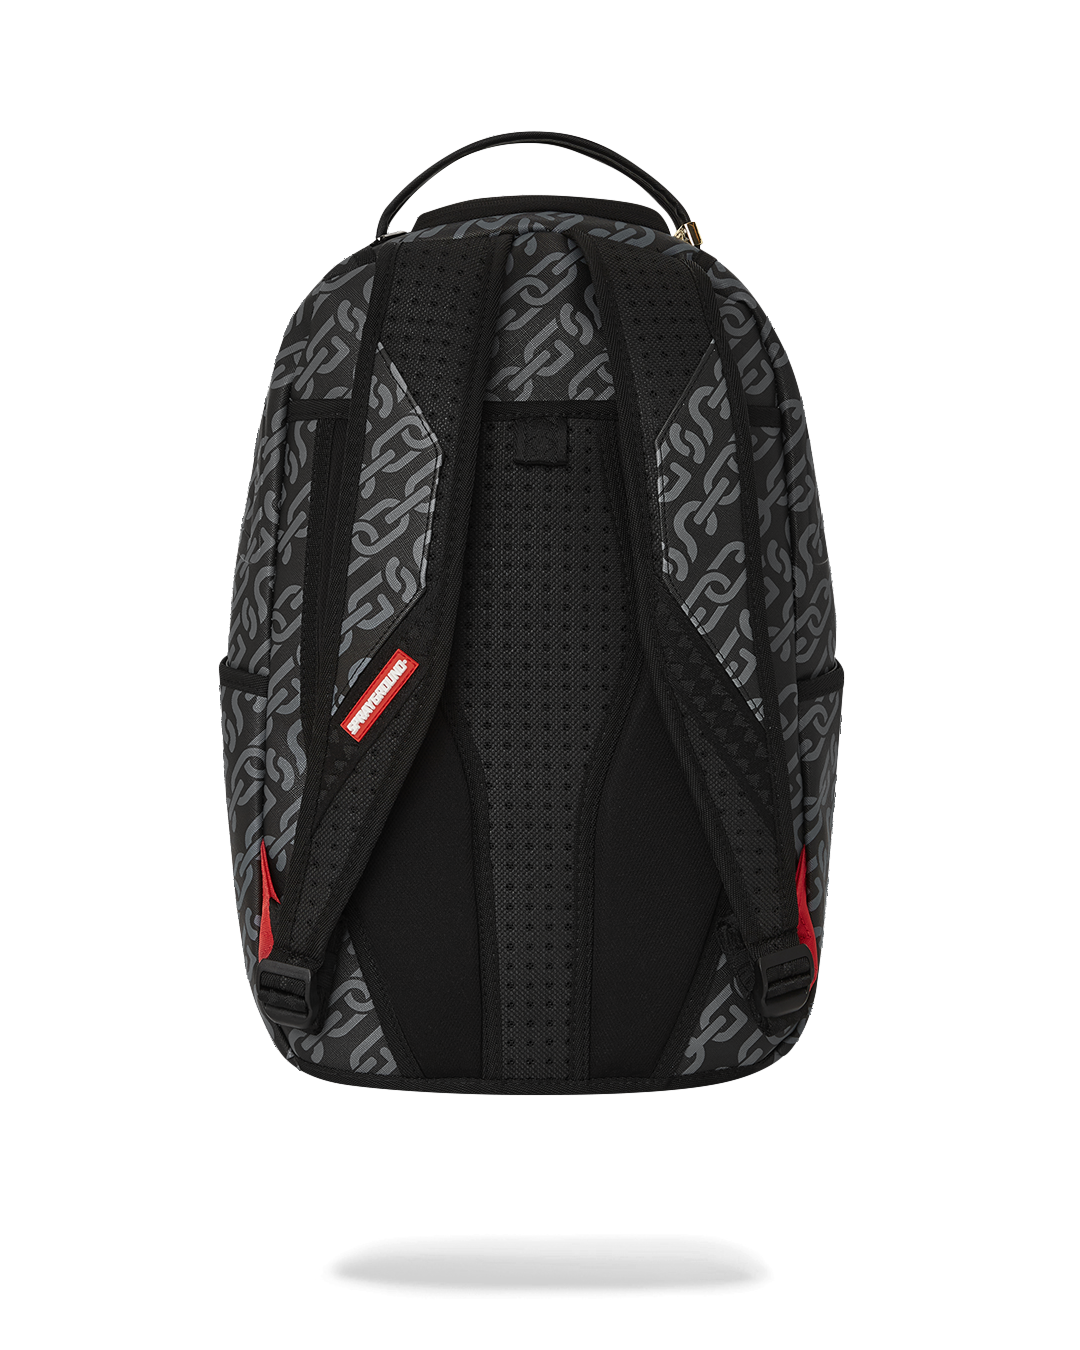 SG CHAIN DLXSV BACKPACK